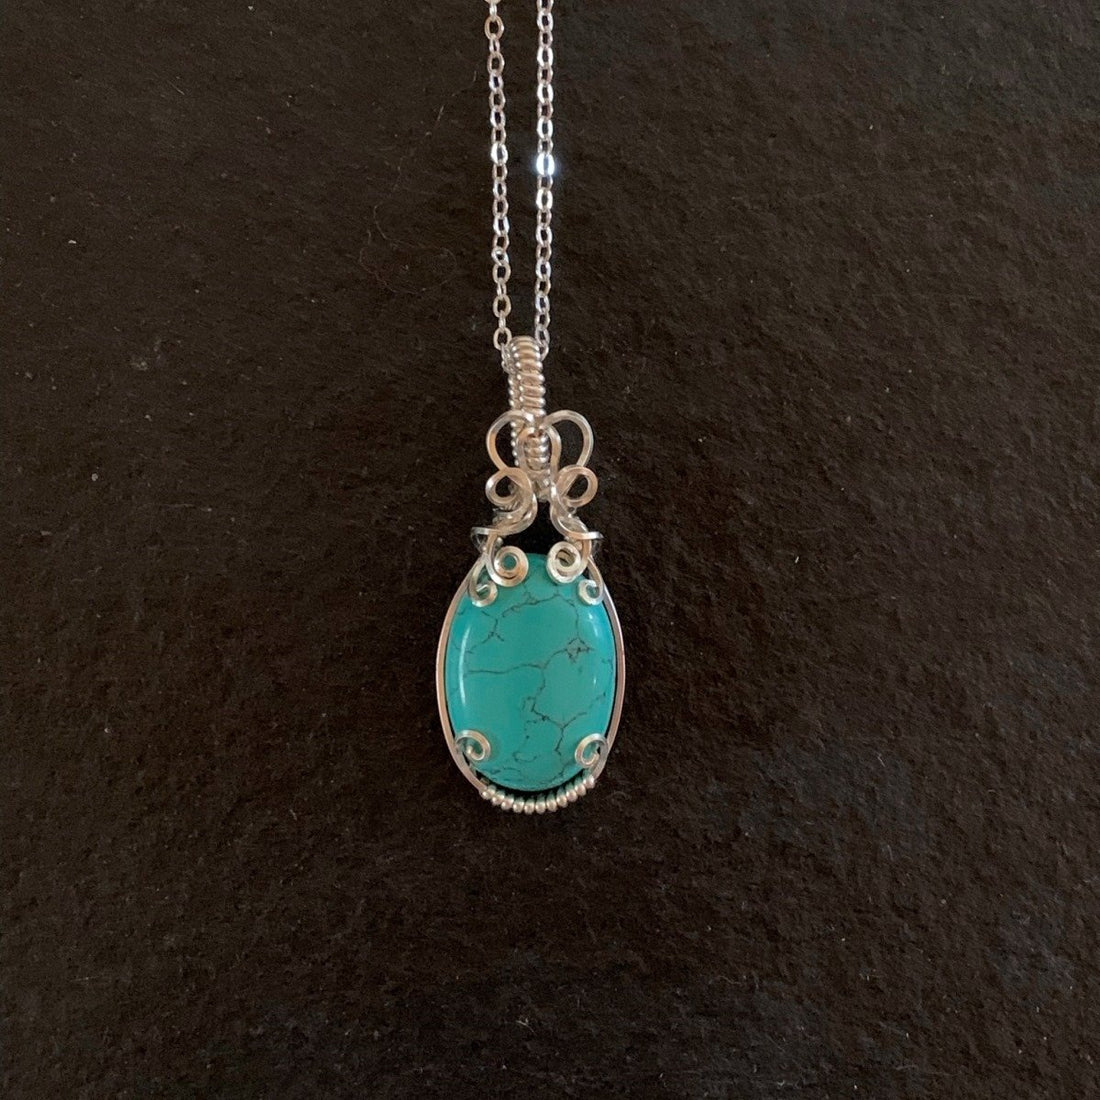 Pendant made of Turquoise Dyed Magnesite with silver wrap.75" w x 2" h, incl bail